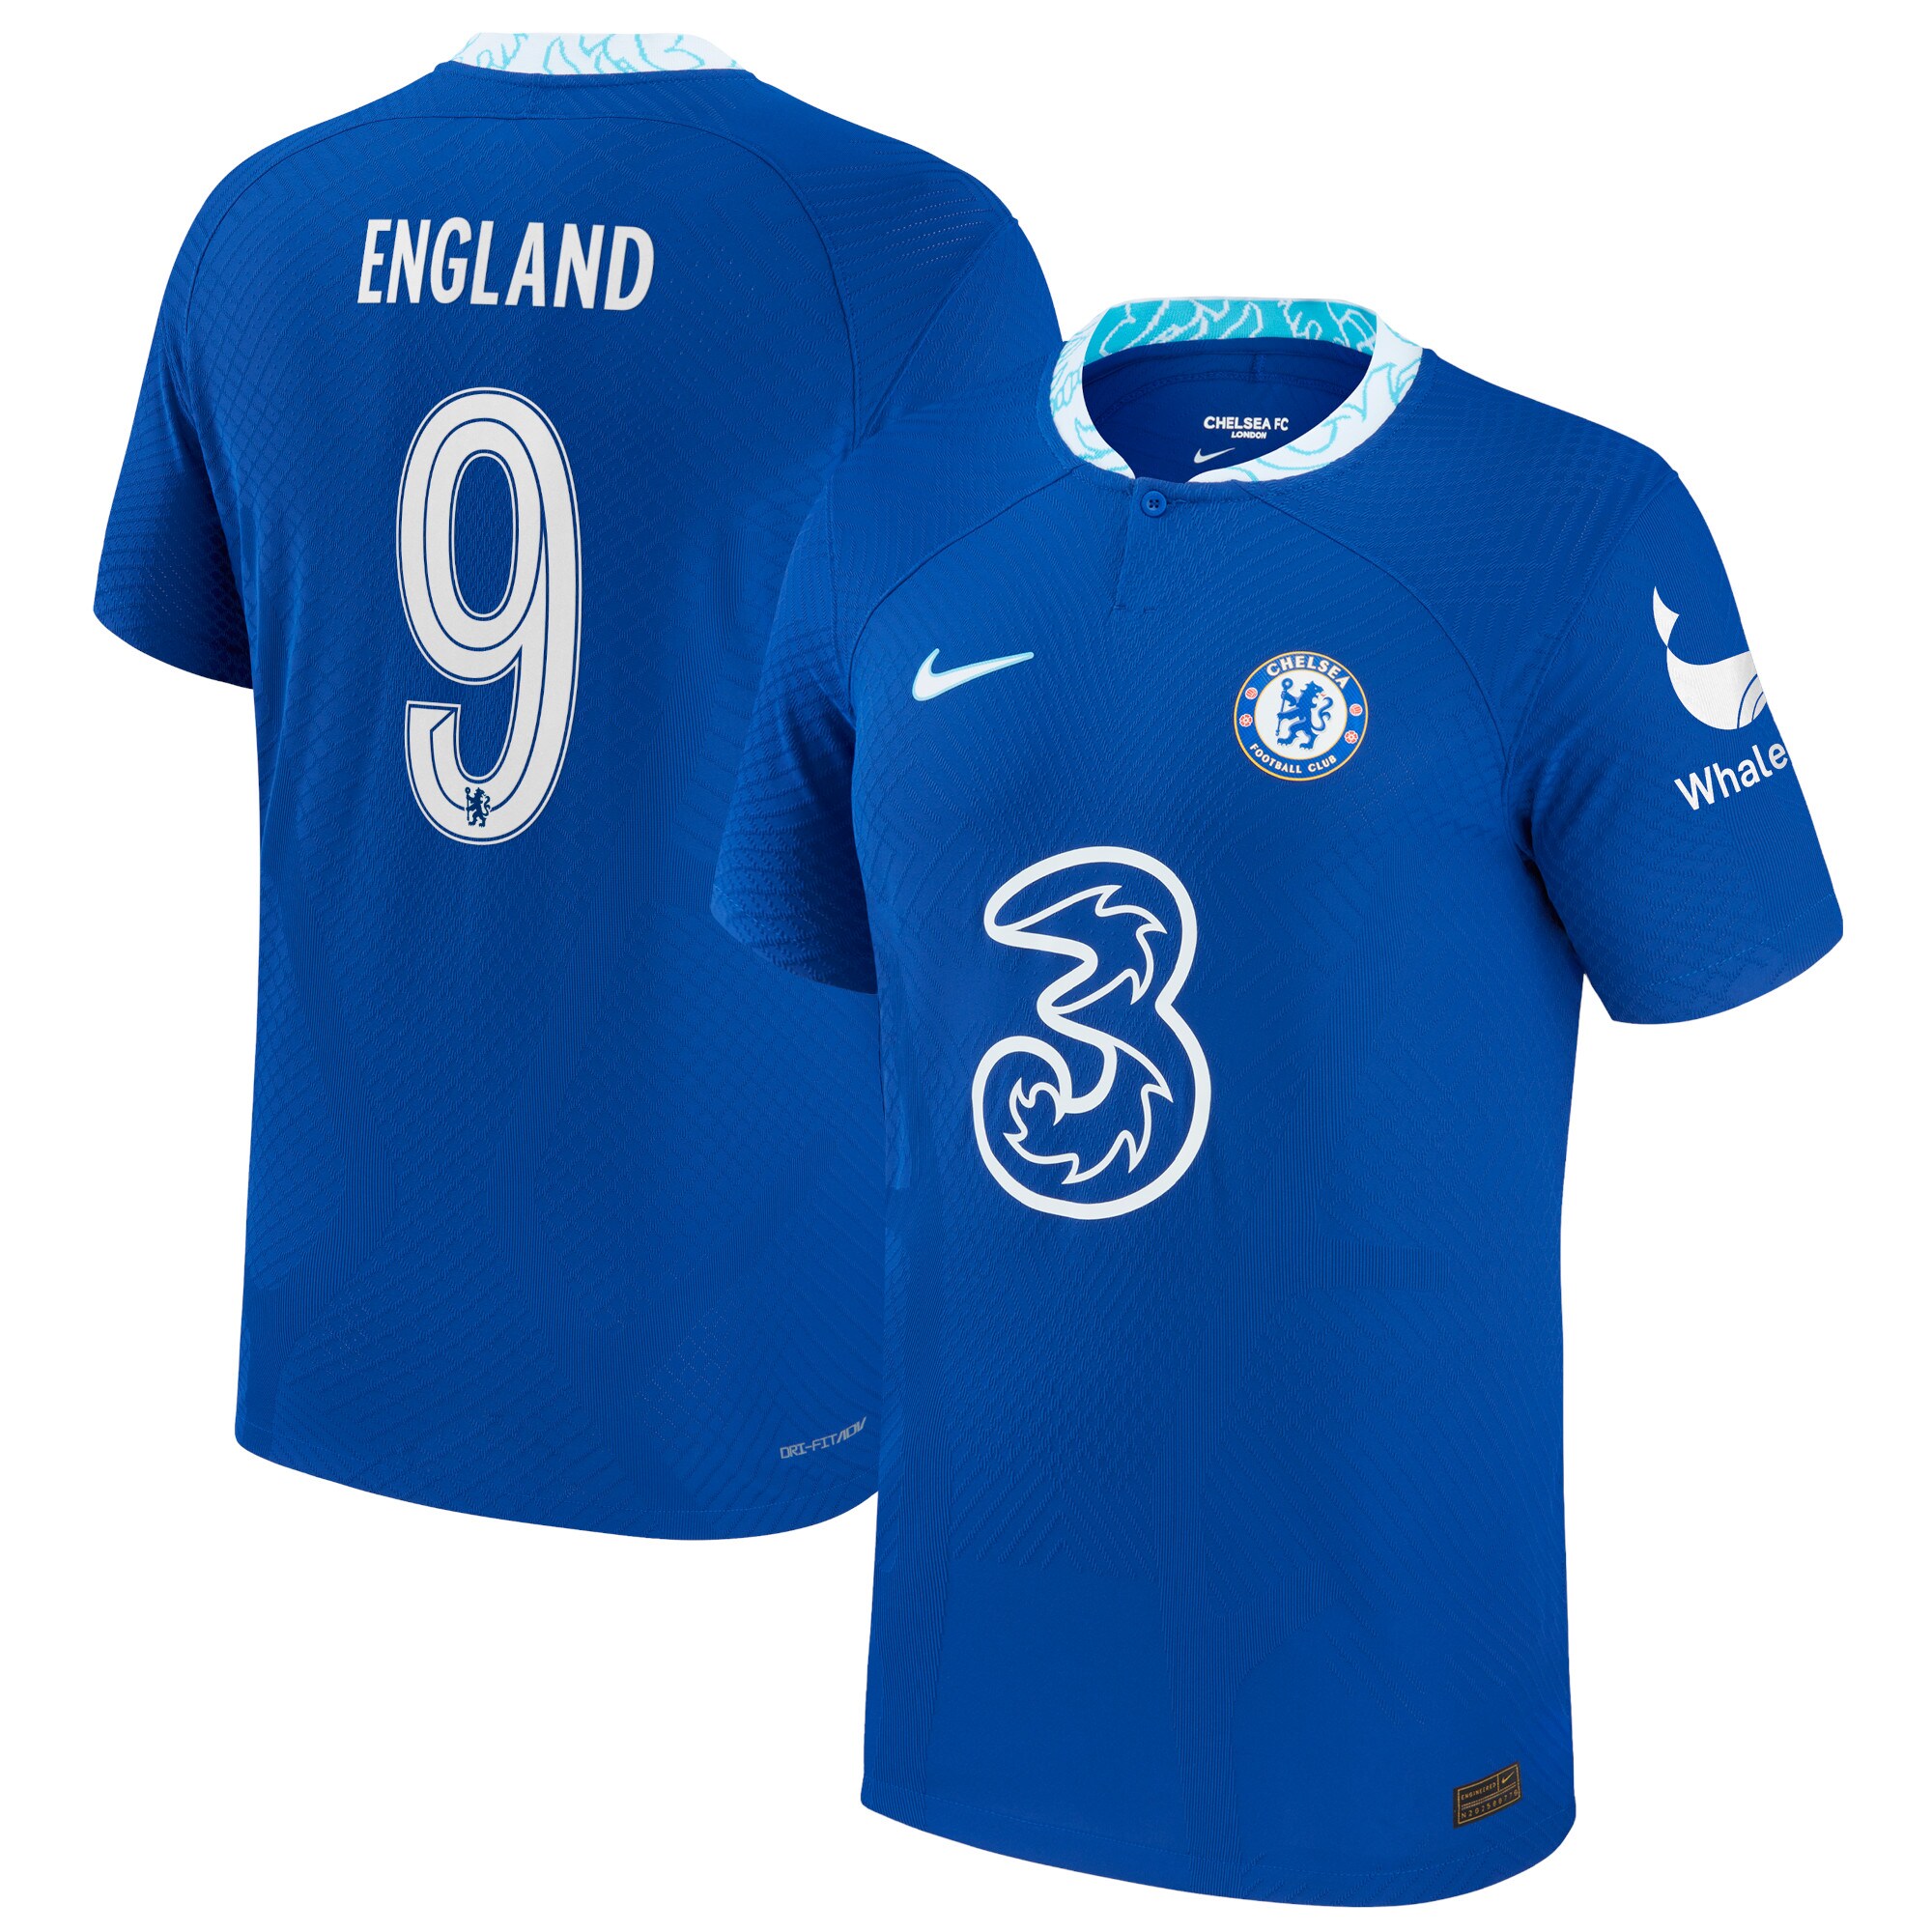 Chelsea Cup Home Vapor Match Shirt 2022-23 with England 9 printing